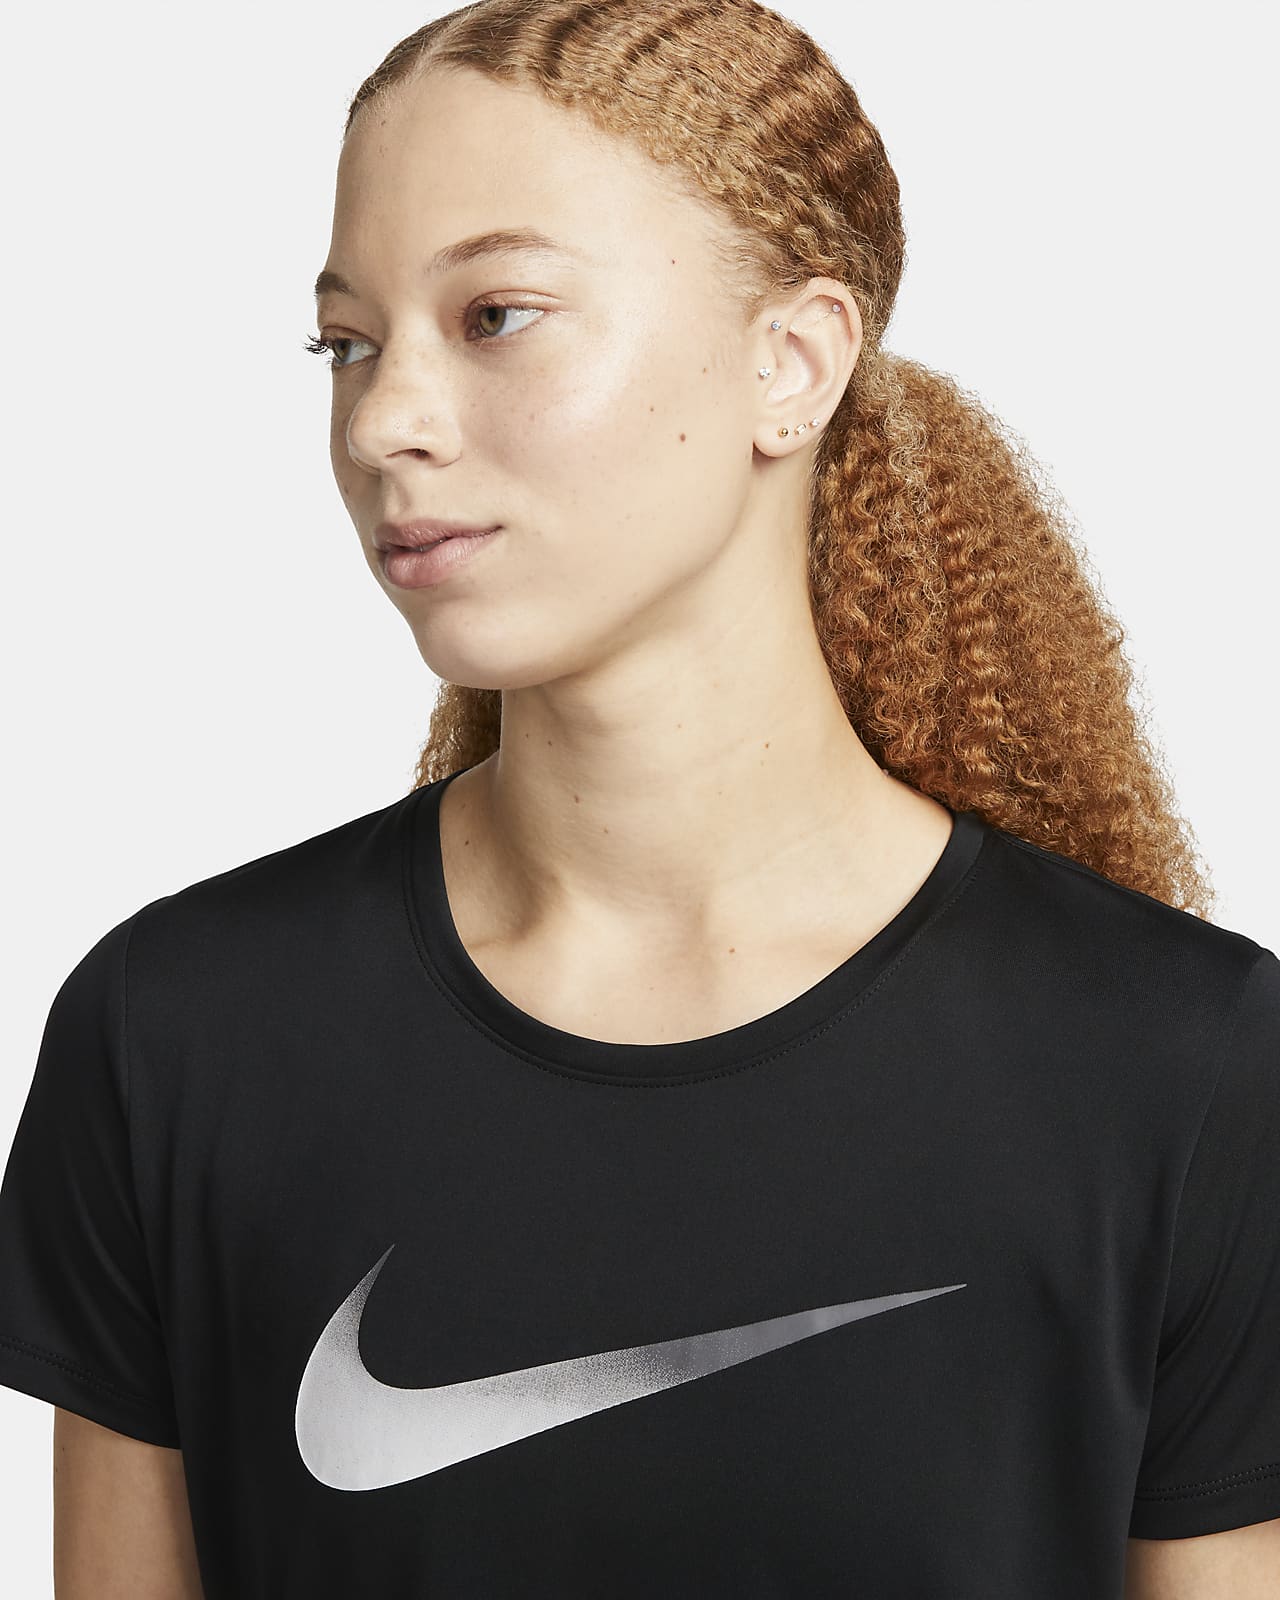 Nike Dri-FIT Short Sleeve Top Women - diffused blue/reflective